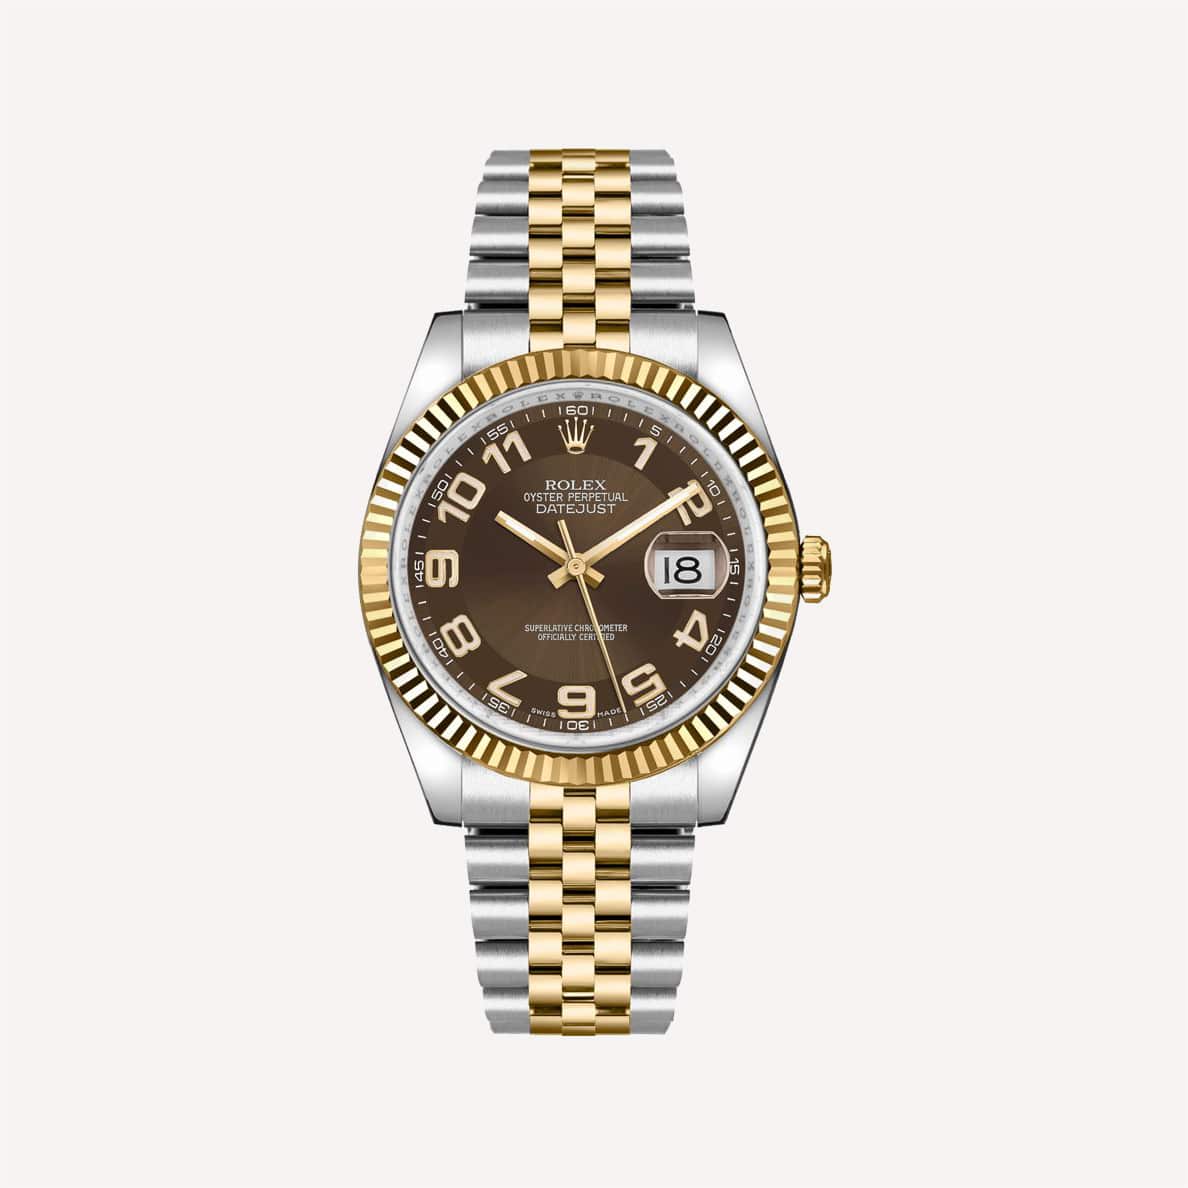 The Rolex Datejust Brown Dial